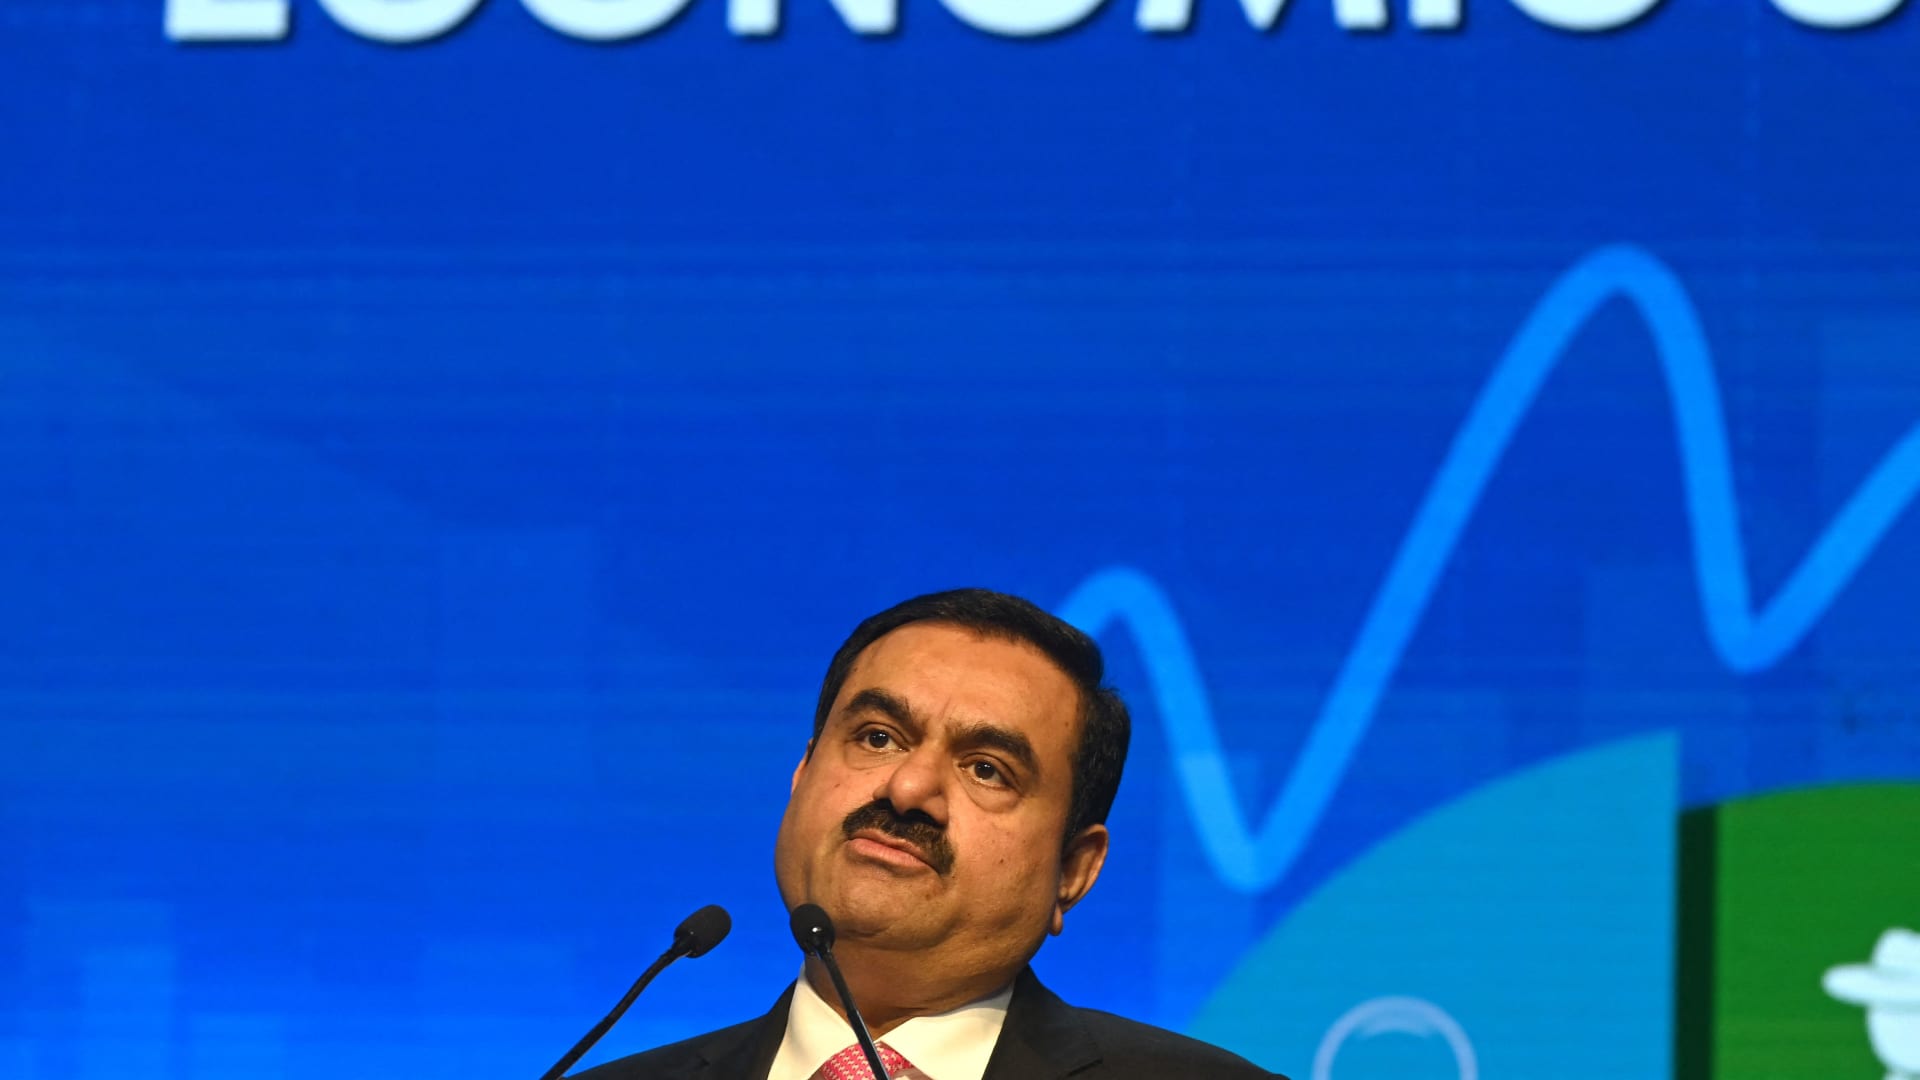 Most Adani shares continue bloodbath as Asia’s richest man loses $28 billion in a month